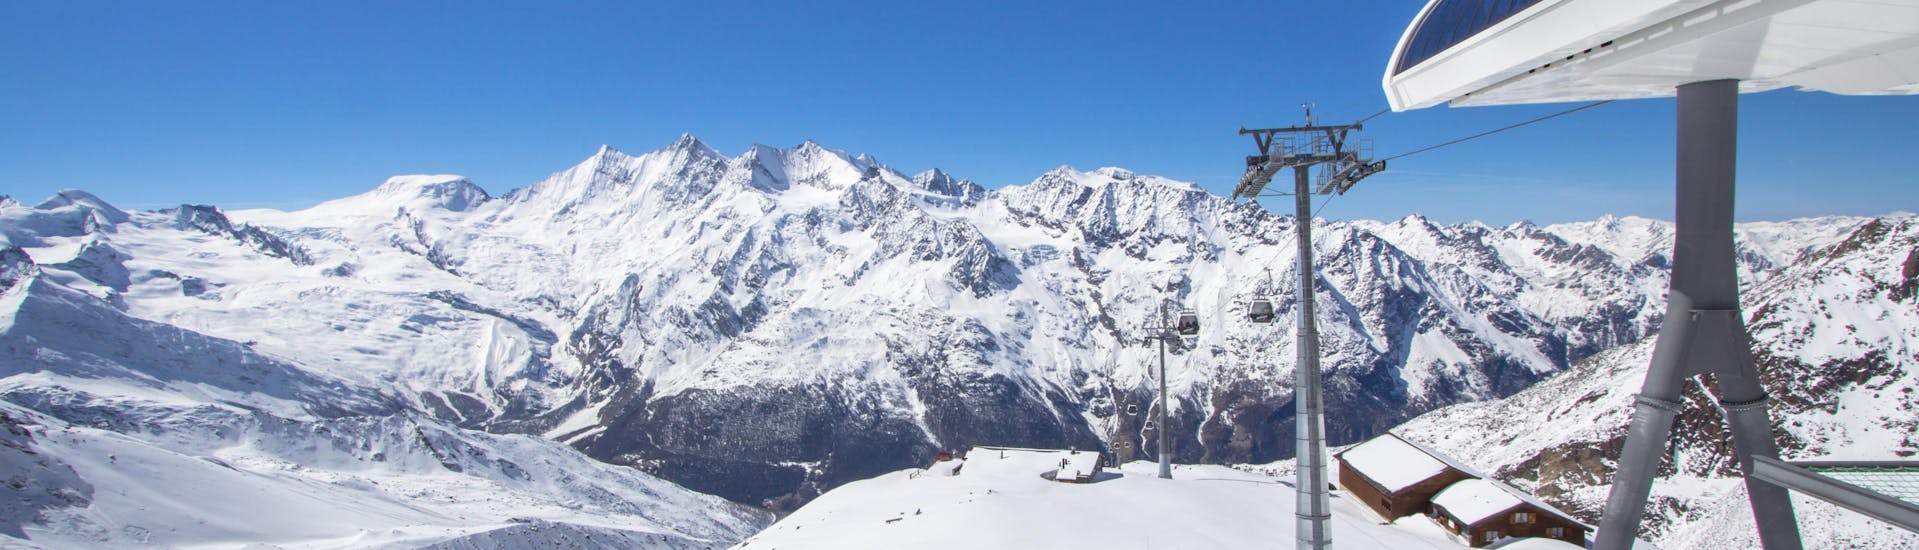 View over the sunny mountain landscape while learning to ski with the ski schools in Saas Grund - Hohsaas.